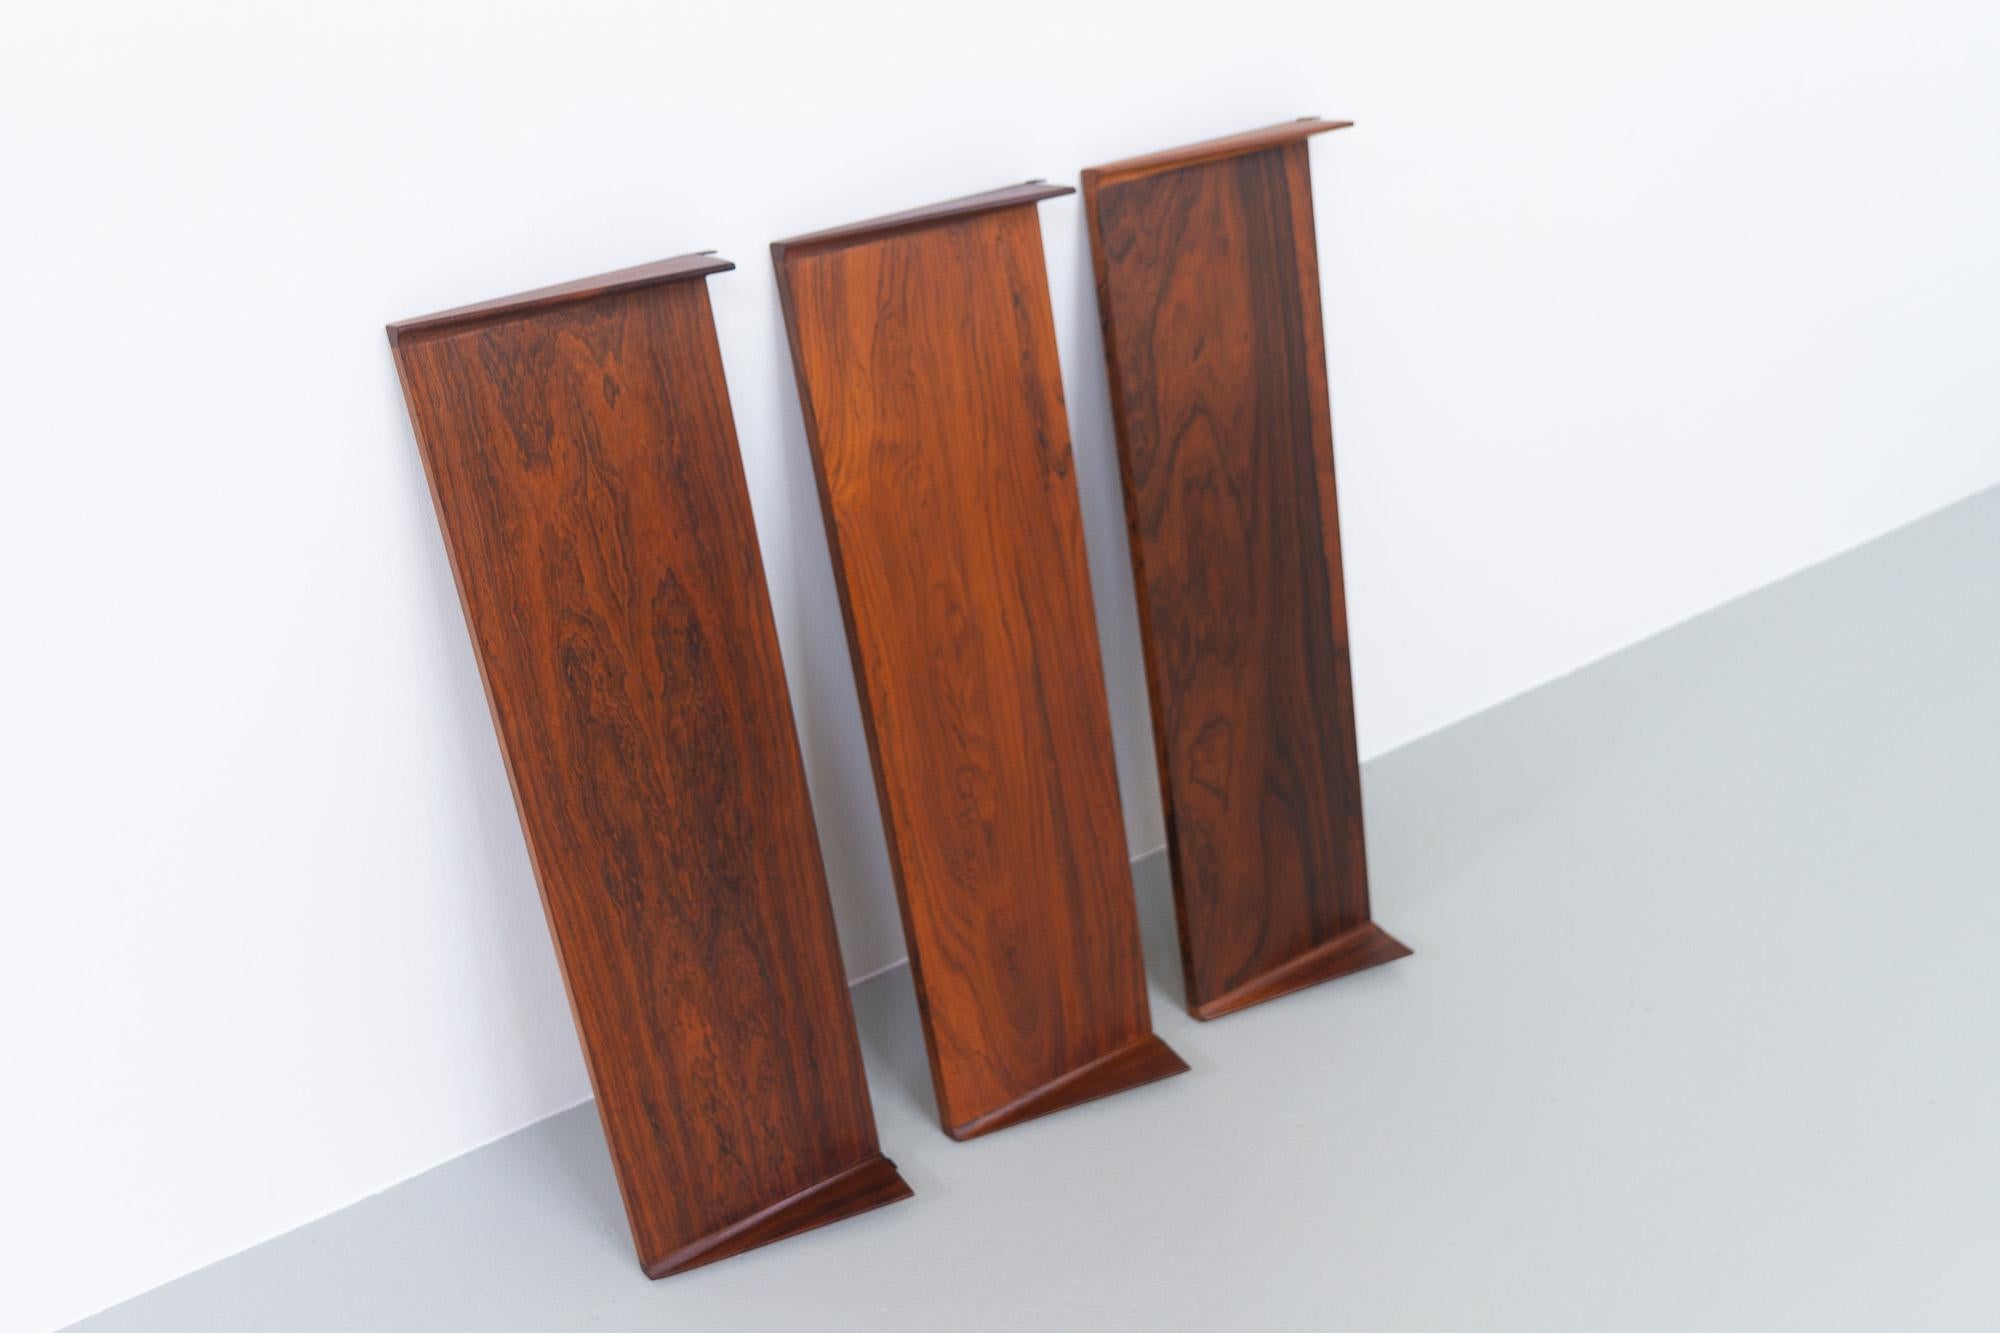 Vintage Danish Rosewood Wall Unit by Kai Kristiansen for FM, 1960s For Sale 10